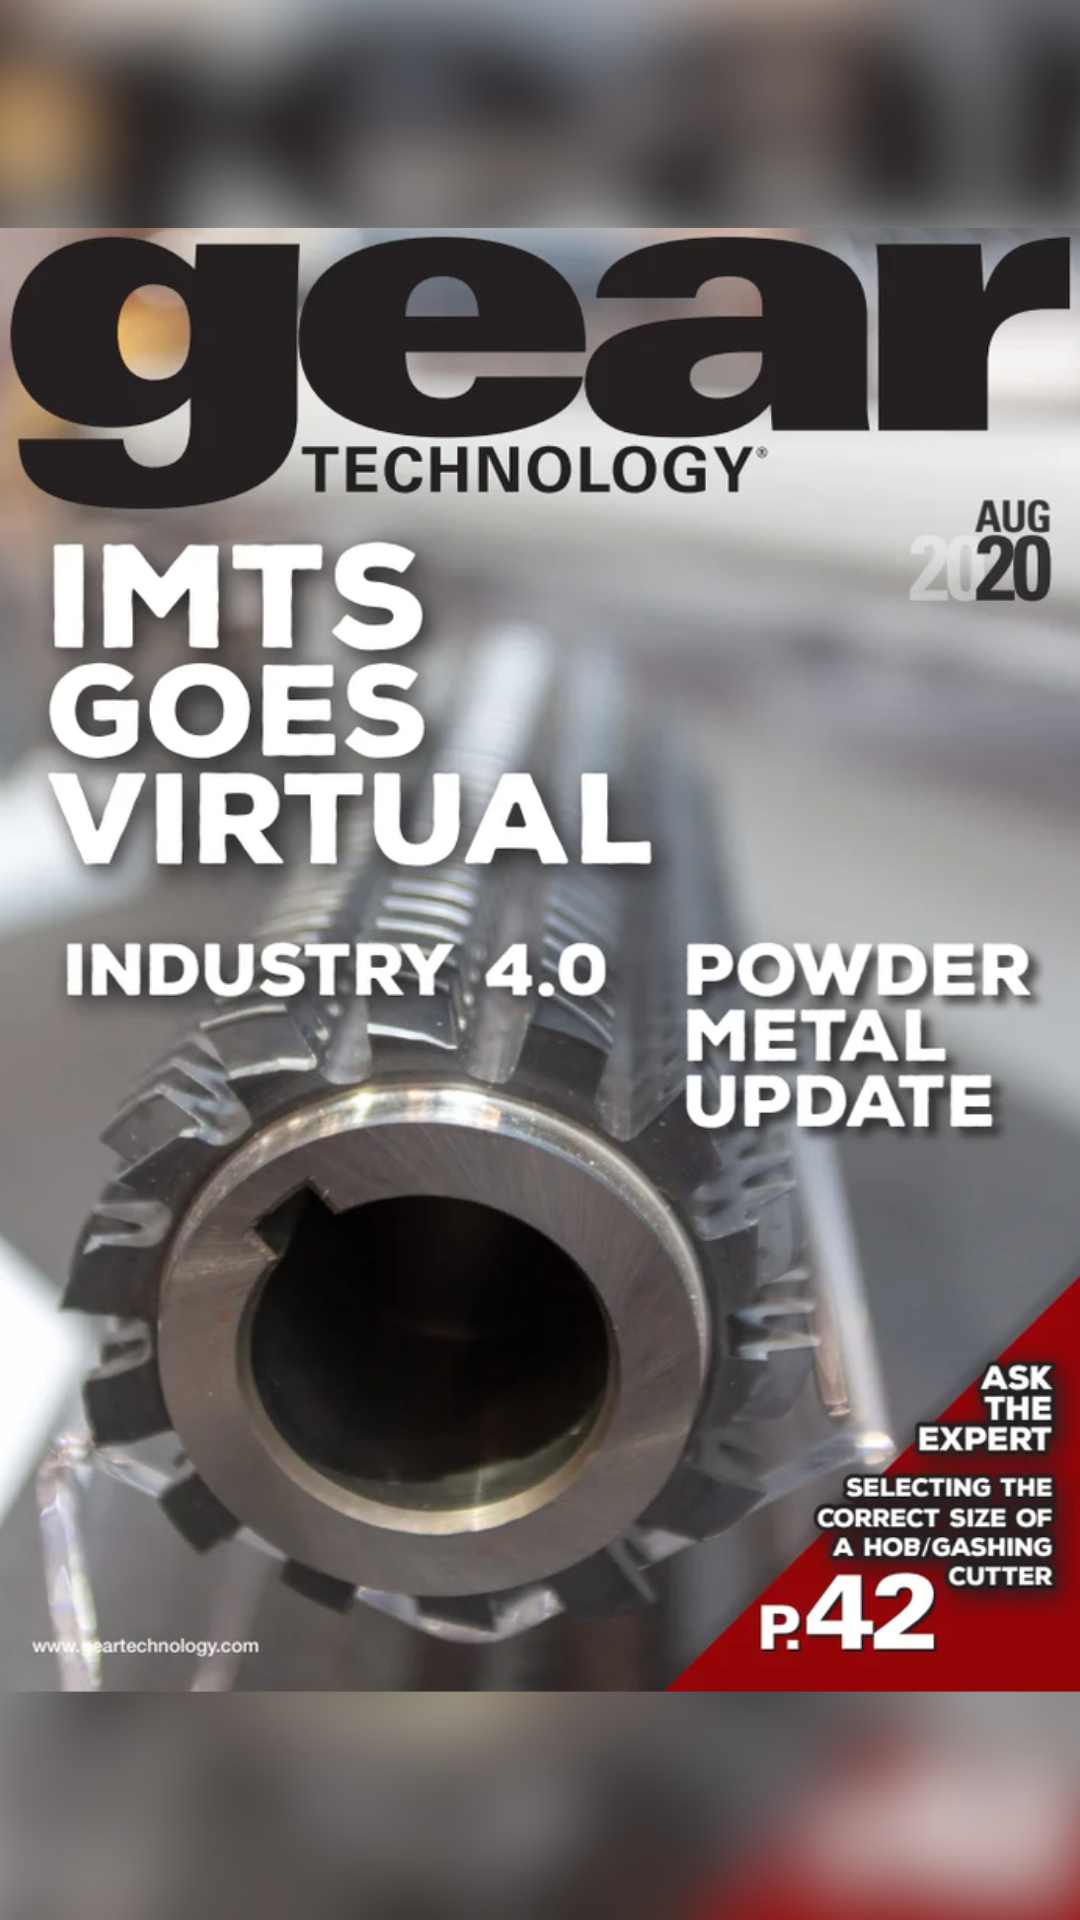 Gear Technology Magazine August 2020 front cover.